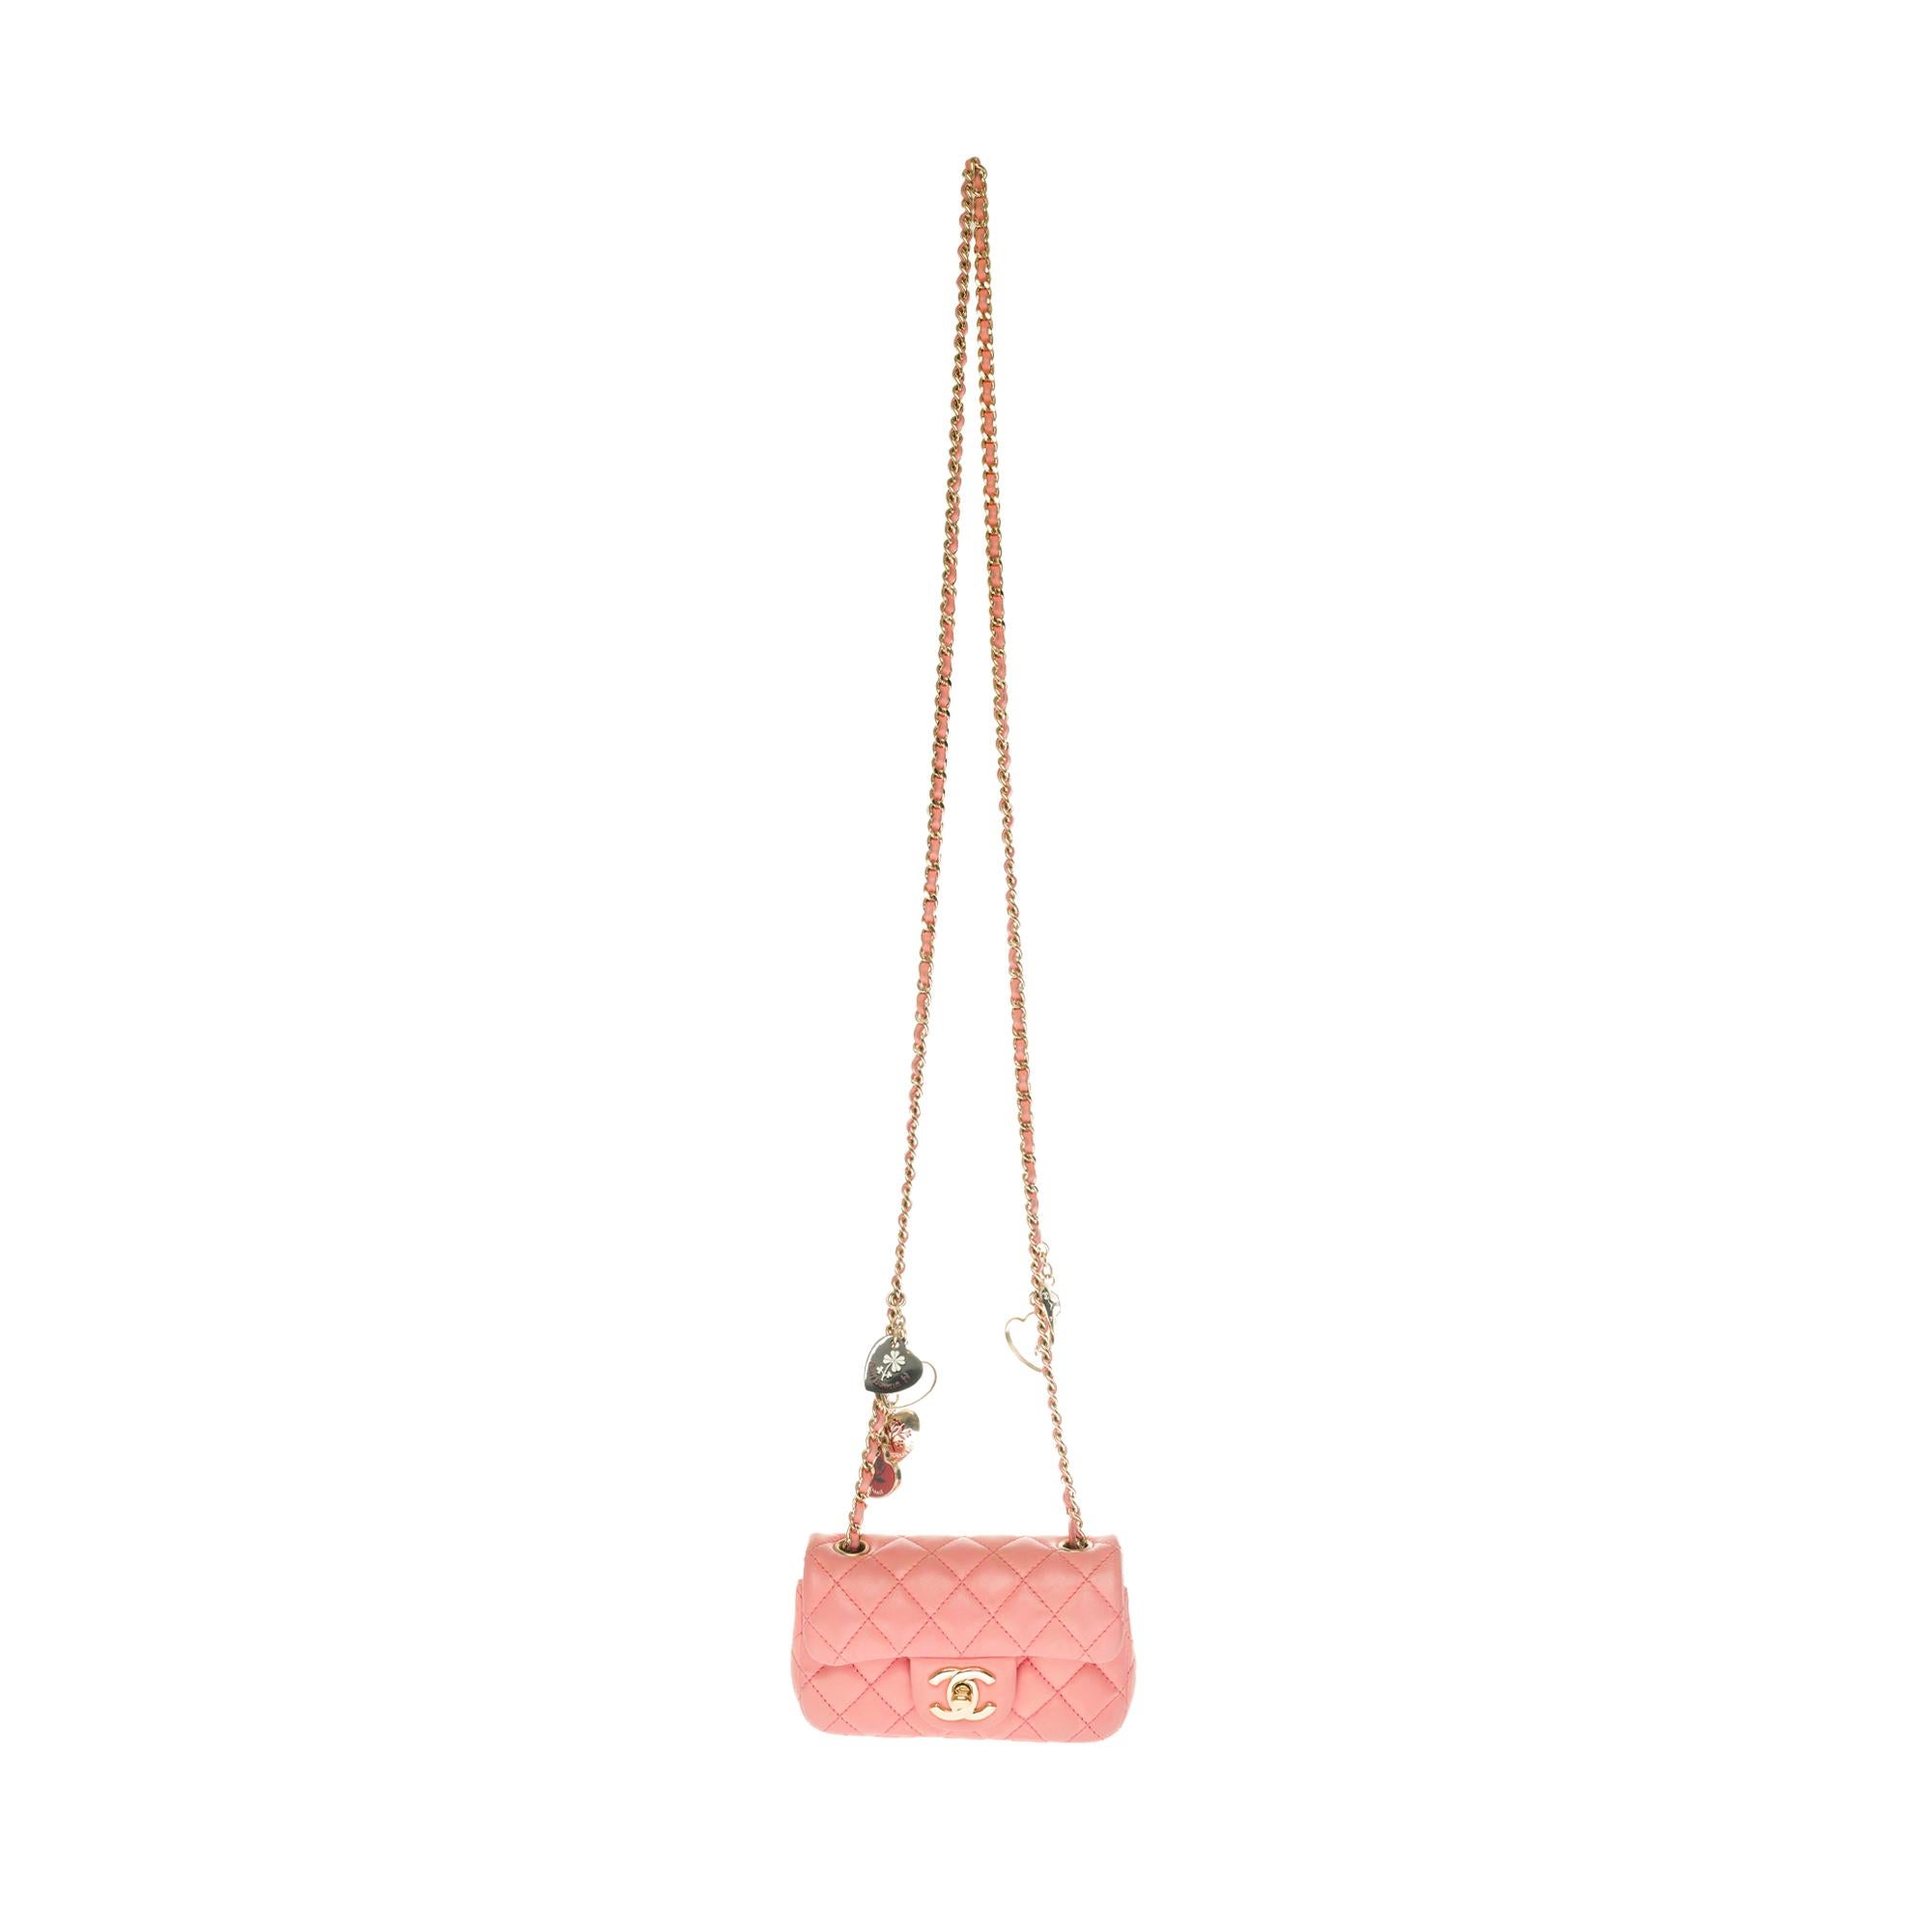 The very Gorgeous and highly coveted Chanel Mini Charms Flap bag in pink quilted leather, gold metal shoulder strap handle decorated with heart-patterned charms (Valentine charms) intertwined with pink leather for a shoulder or shoulder